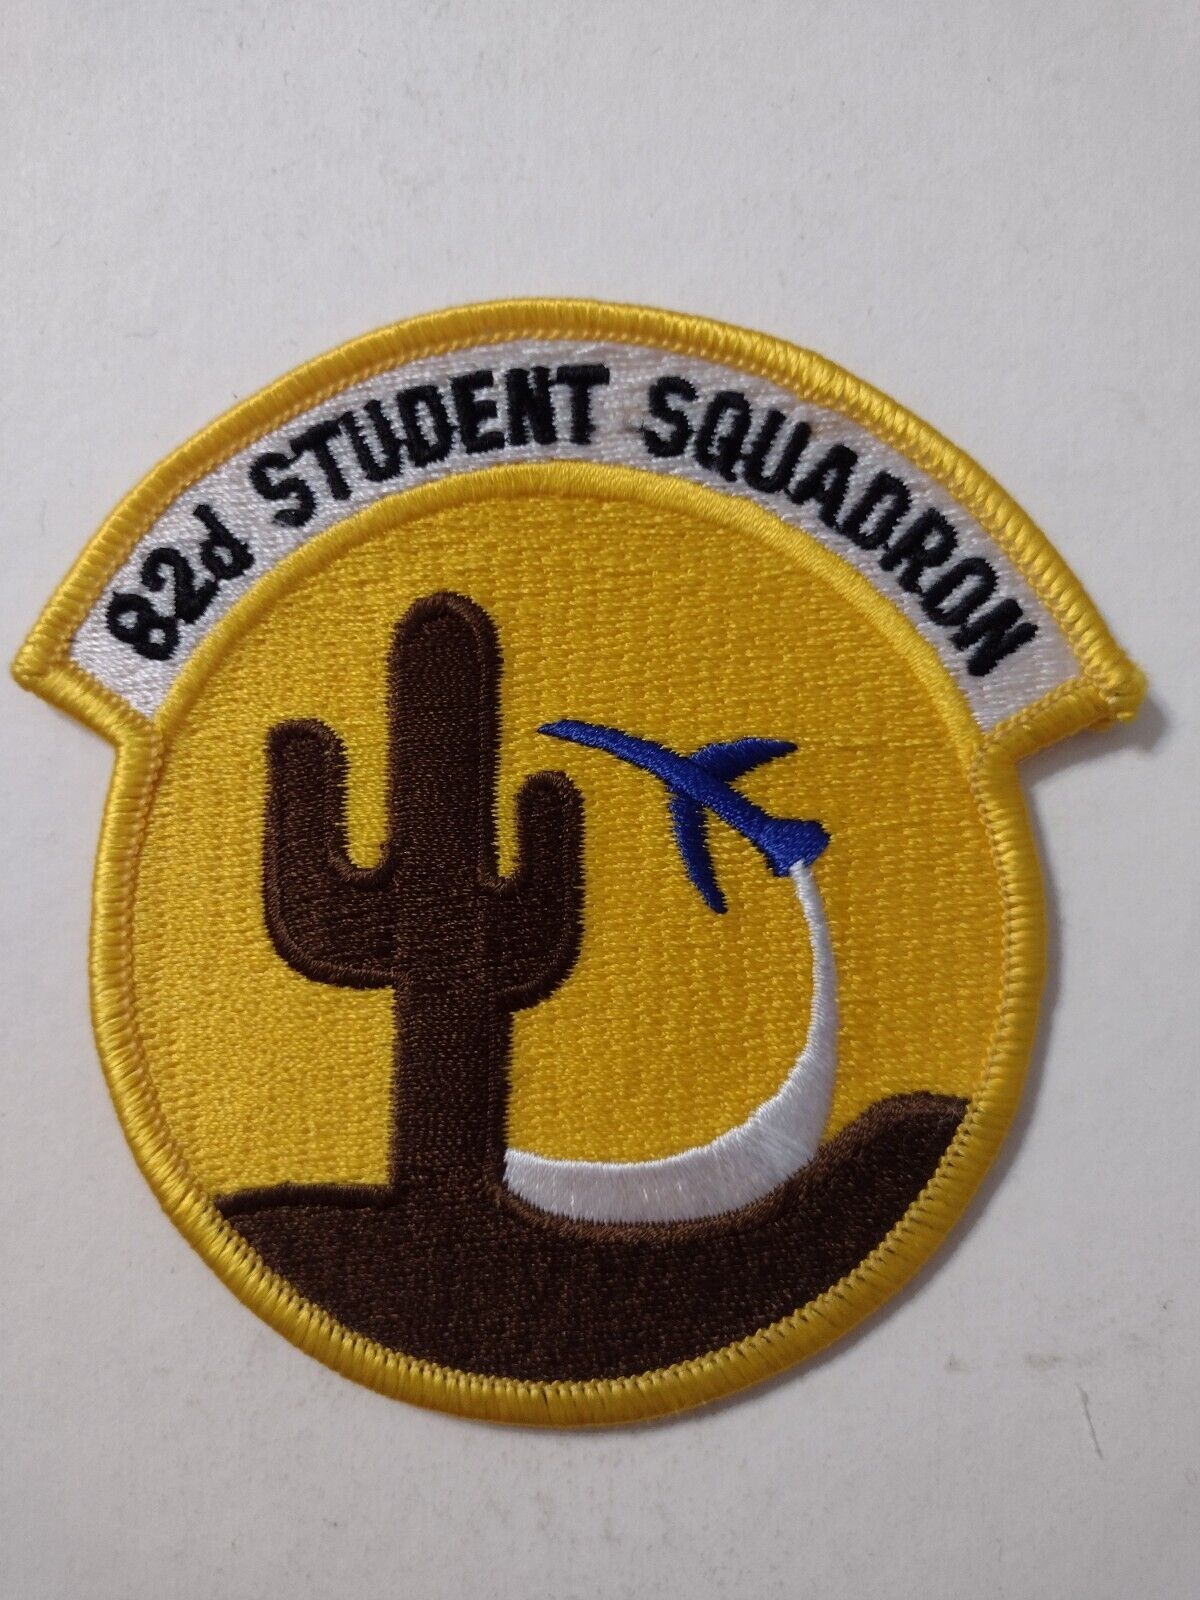 Primary image for USAF 82nd STUDENT  SQUADRON PATCH   :KY24-9